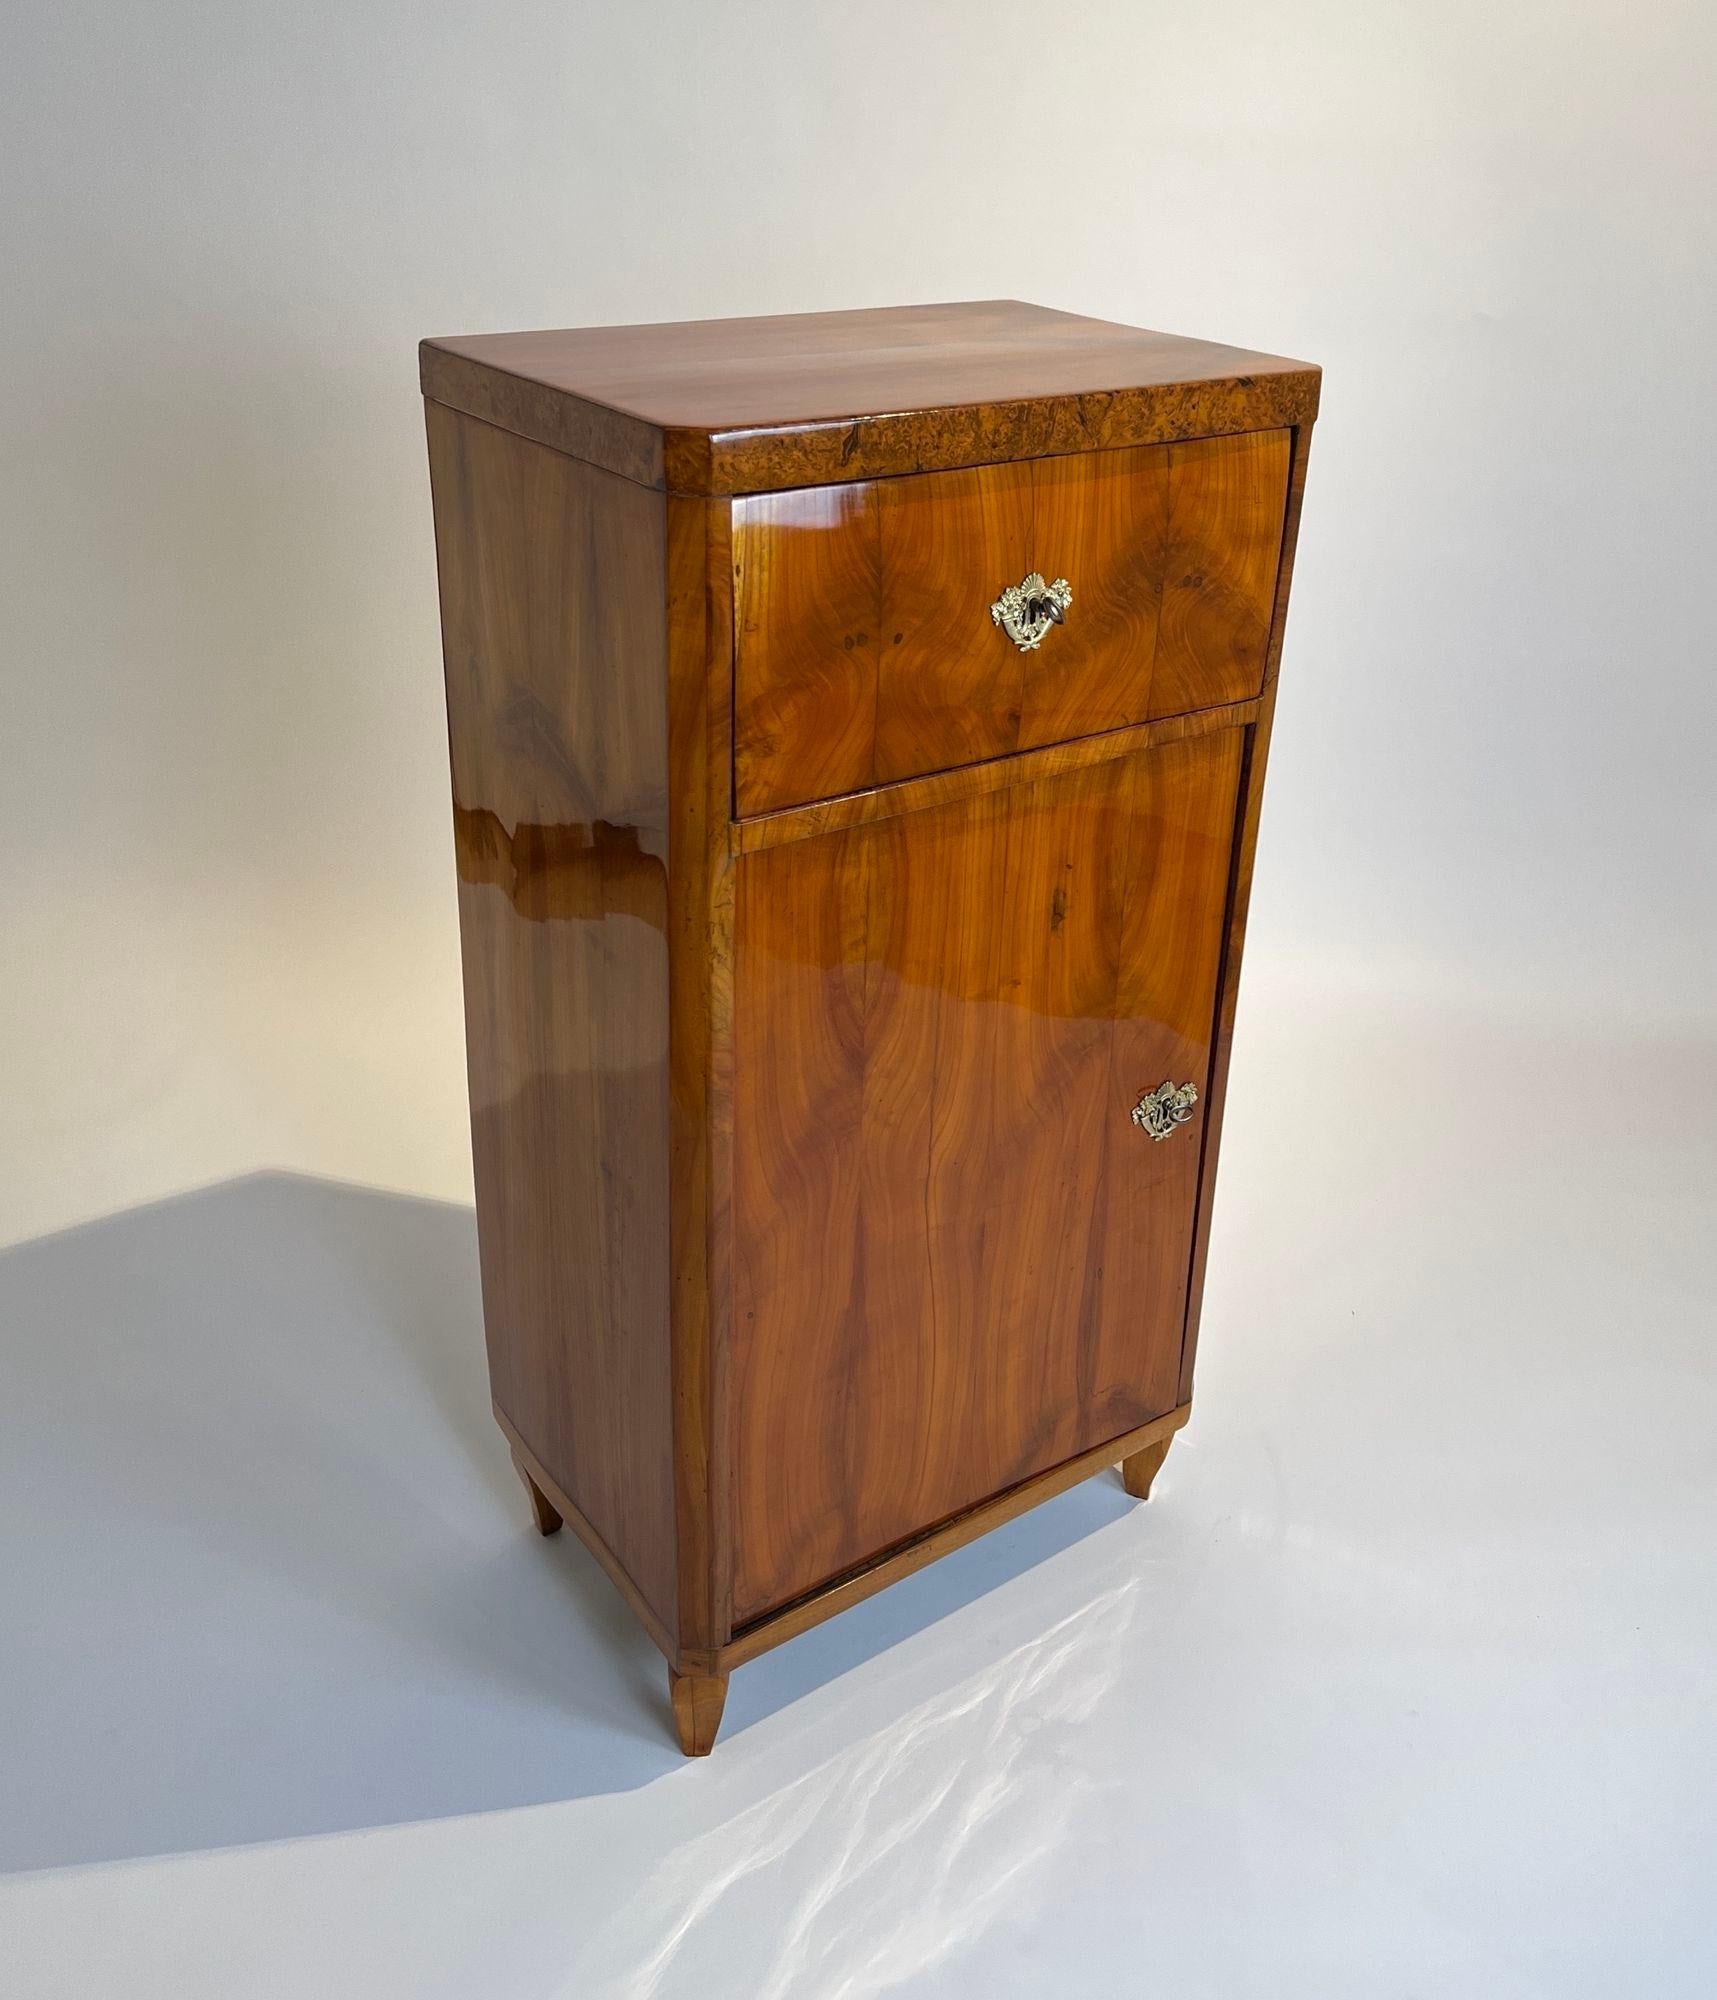 High Biedermeier pillar cabinet from southern Germany around 1825.
Cherry wood veneered on softwood and solid. Burl wood veneered edge.
Cast original brass fittings.
One drawer at the top and door below. Another drawer at the bottom inside.
Restored